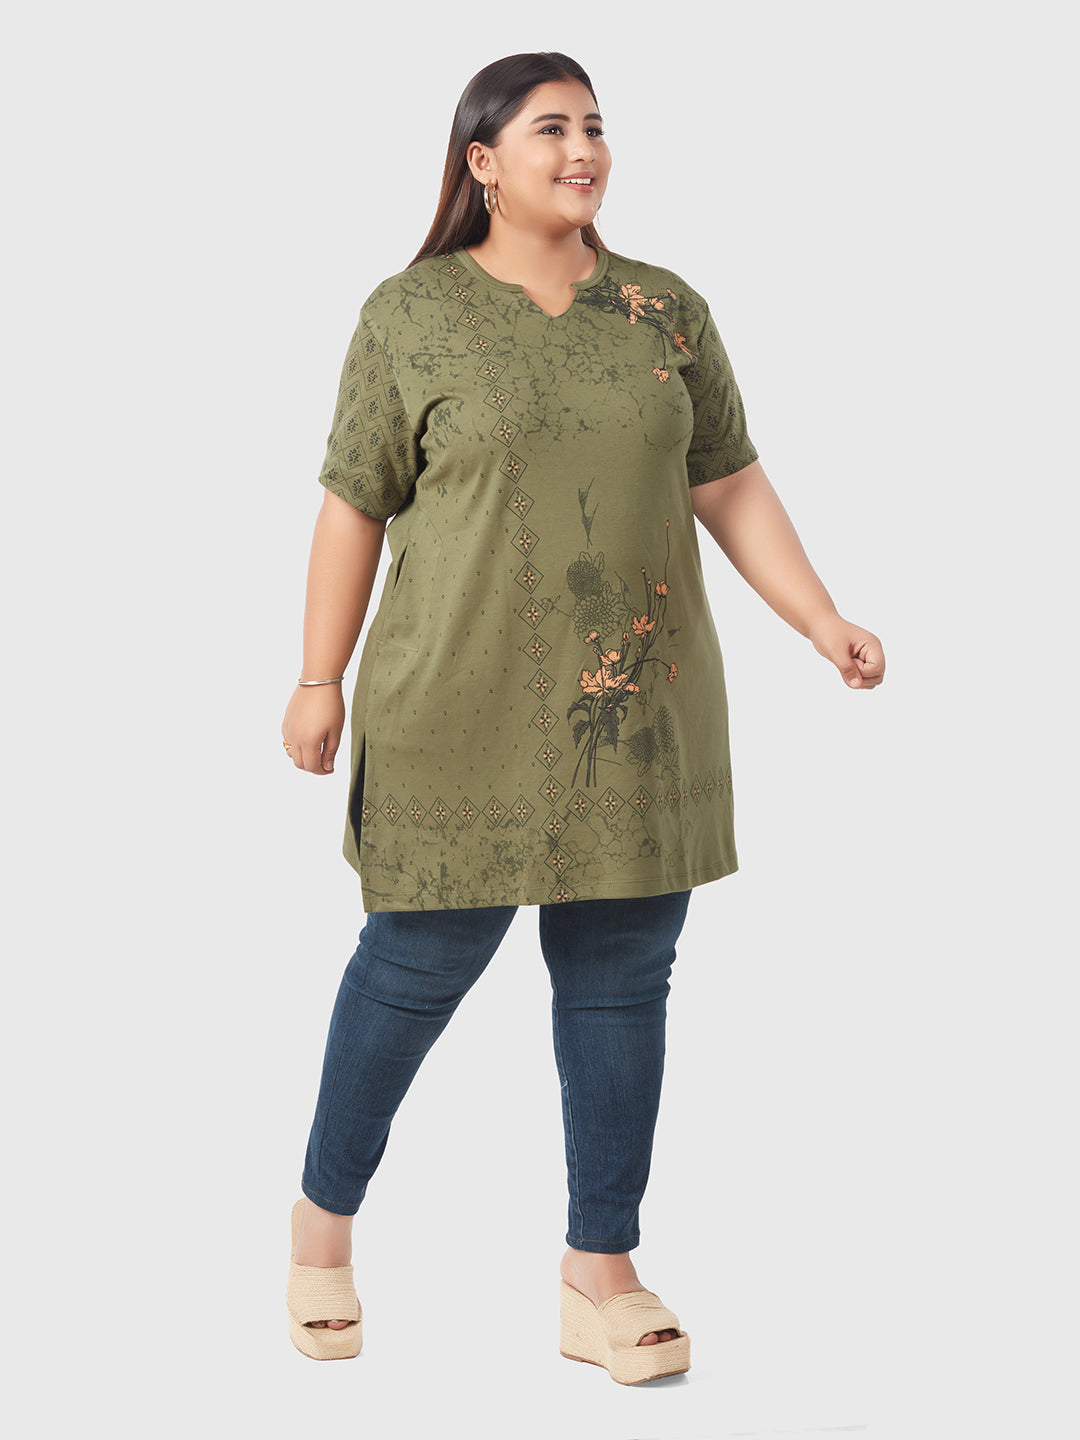 Plus Size Printed Long Tops For Women Half Sleeves - Olive Green